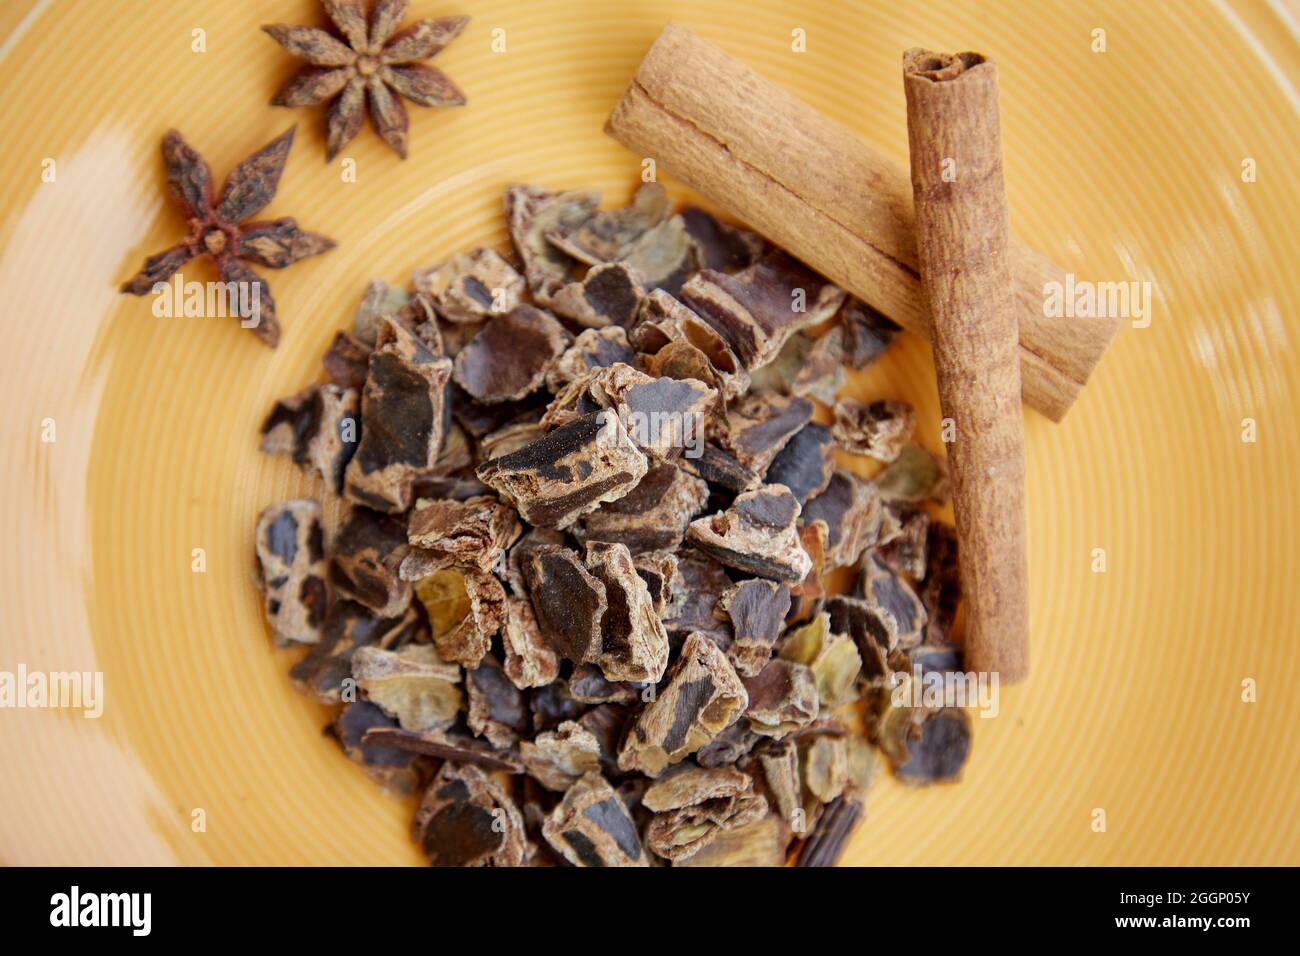 Plant-based alternative - natural carob close up. Organic antioxidants and protein. Decoration with cinnamon sticks and dried cloves. Top view. High quality photo Stock Photo